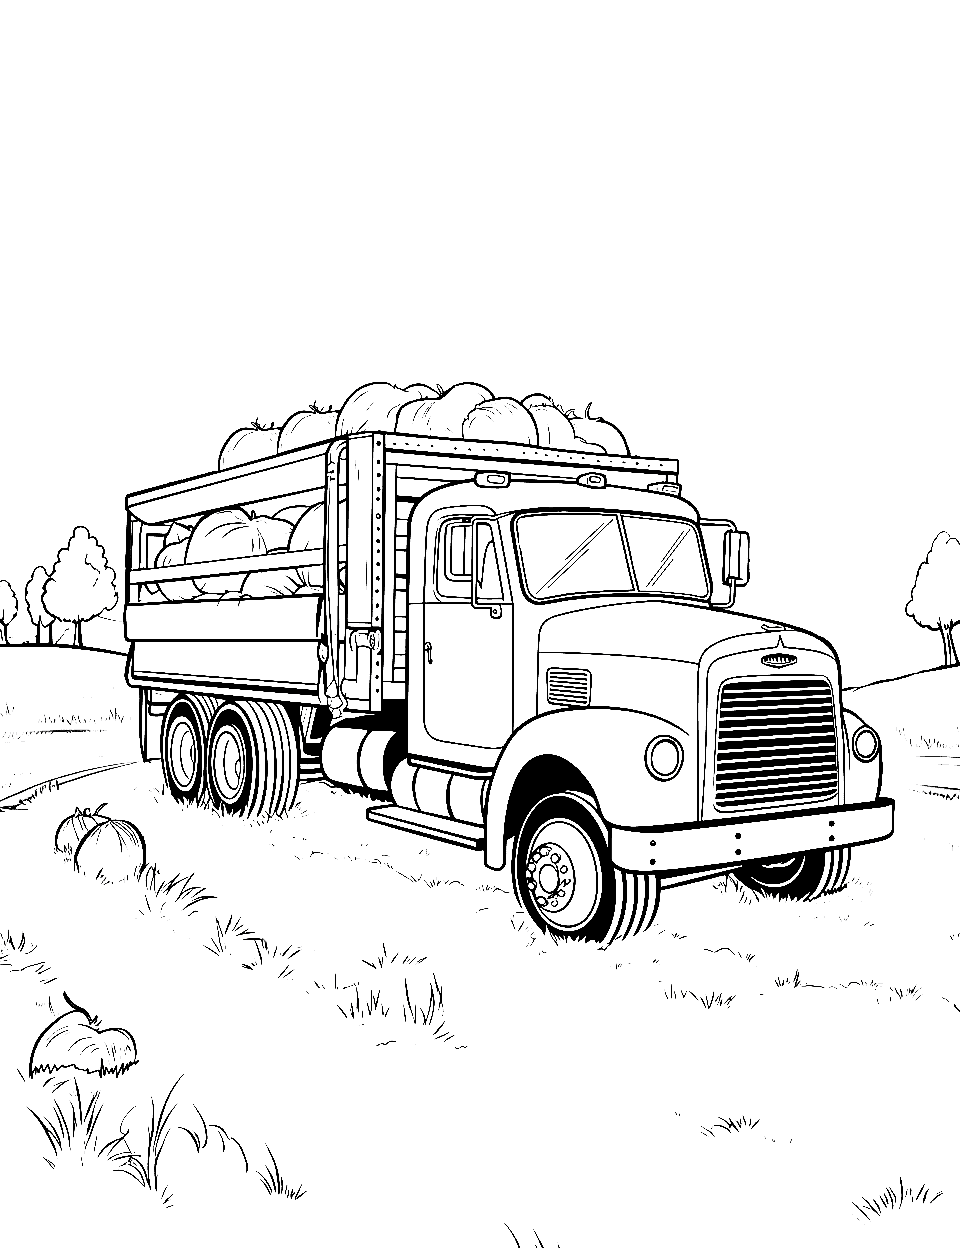 Pumpkins Delivery Coloring Page - A farm truck loaded with pumpkins at a cheerful autumn pumpkin patch ready to deliver.